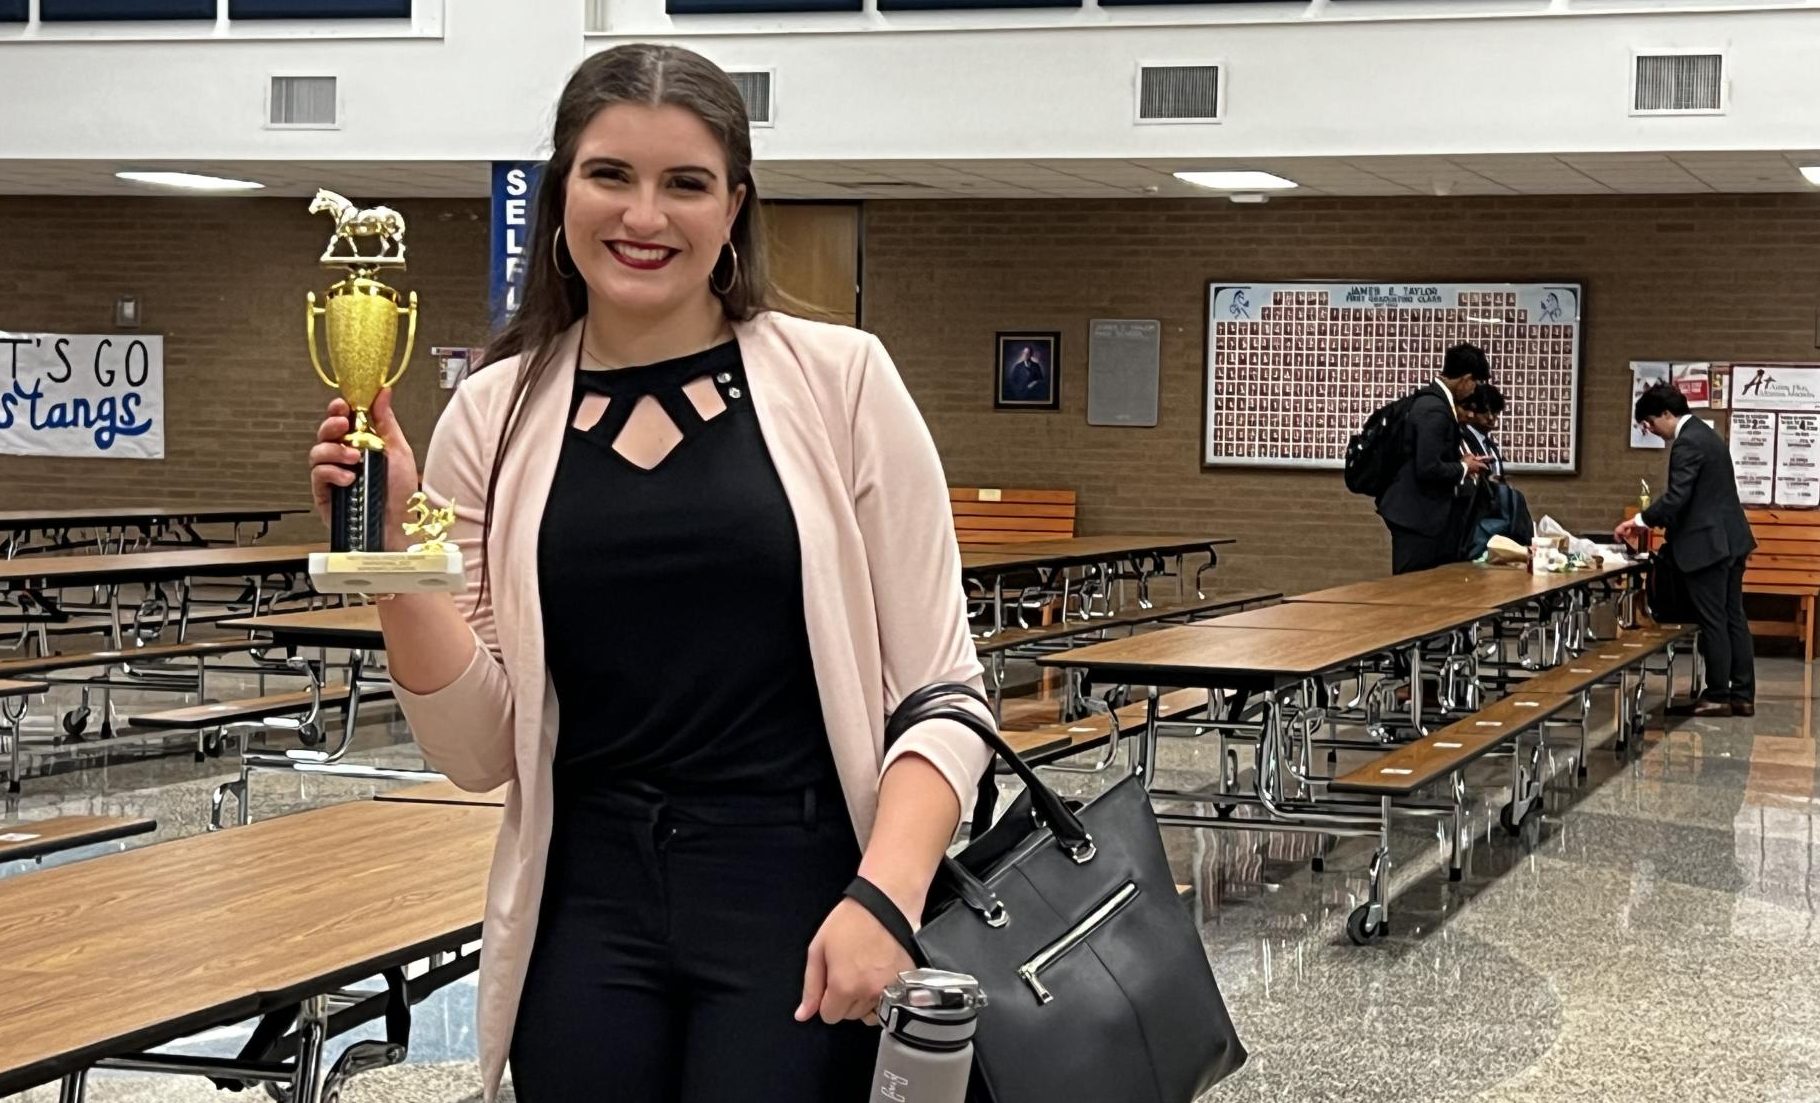 Senior Nicollette Arabie shows off the trophy she earned at the Katy-Taylor tournament. She placed in both Extemp and Impromptu.